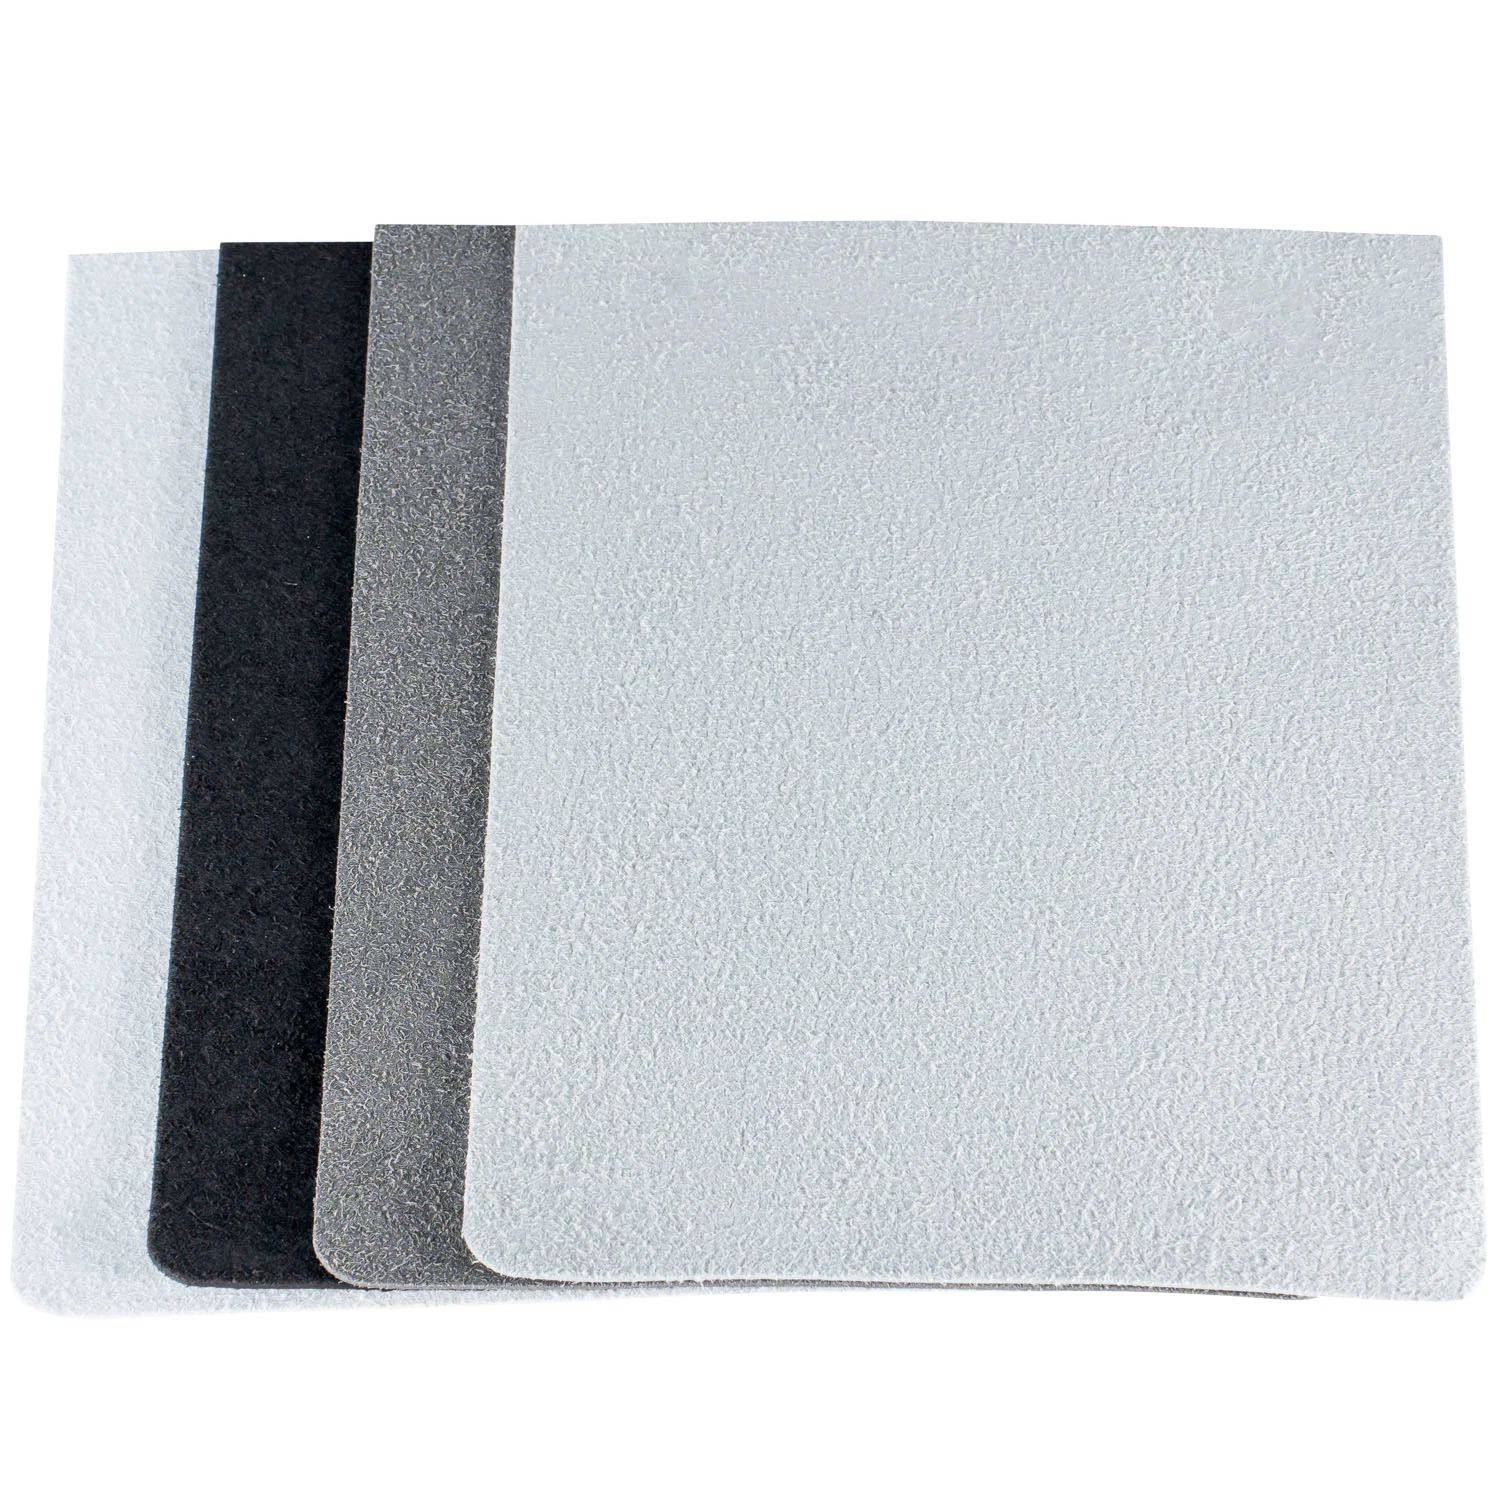 Microfiber Base for Reinforcement Bags Leather Goods Huafon High Quality Microfiber